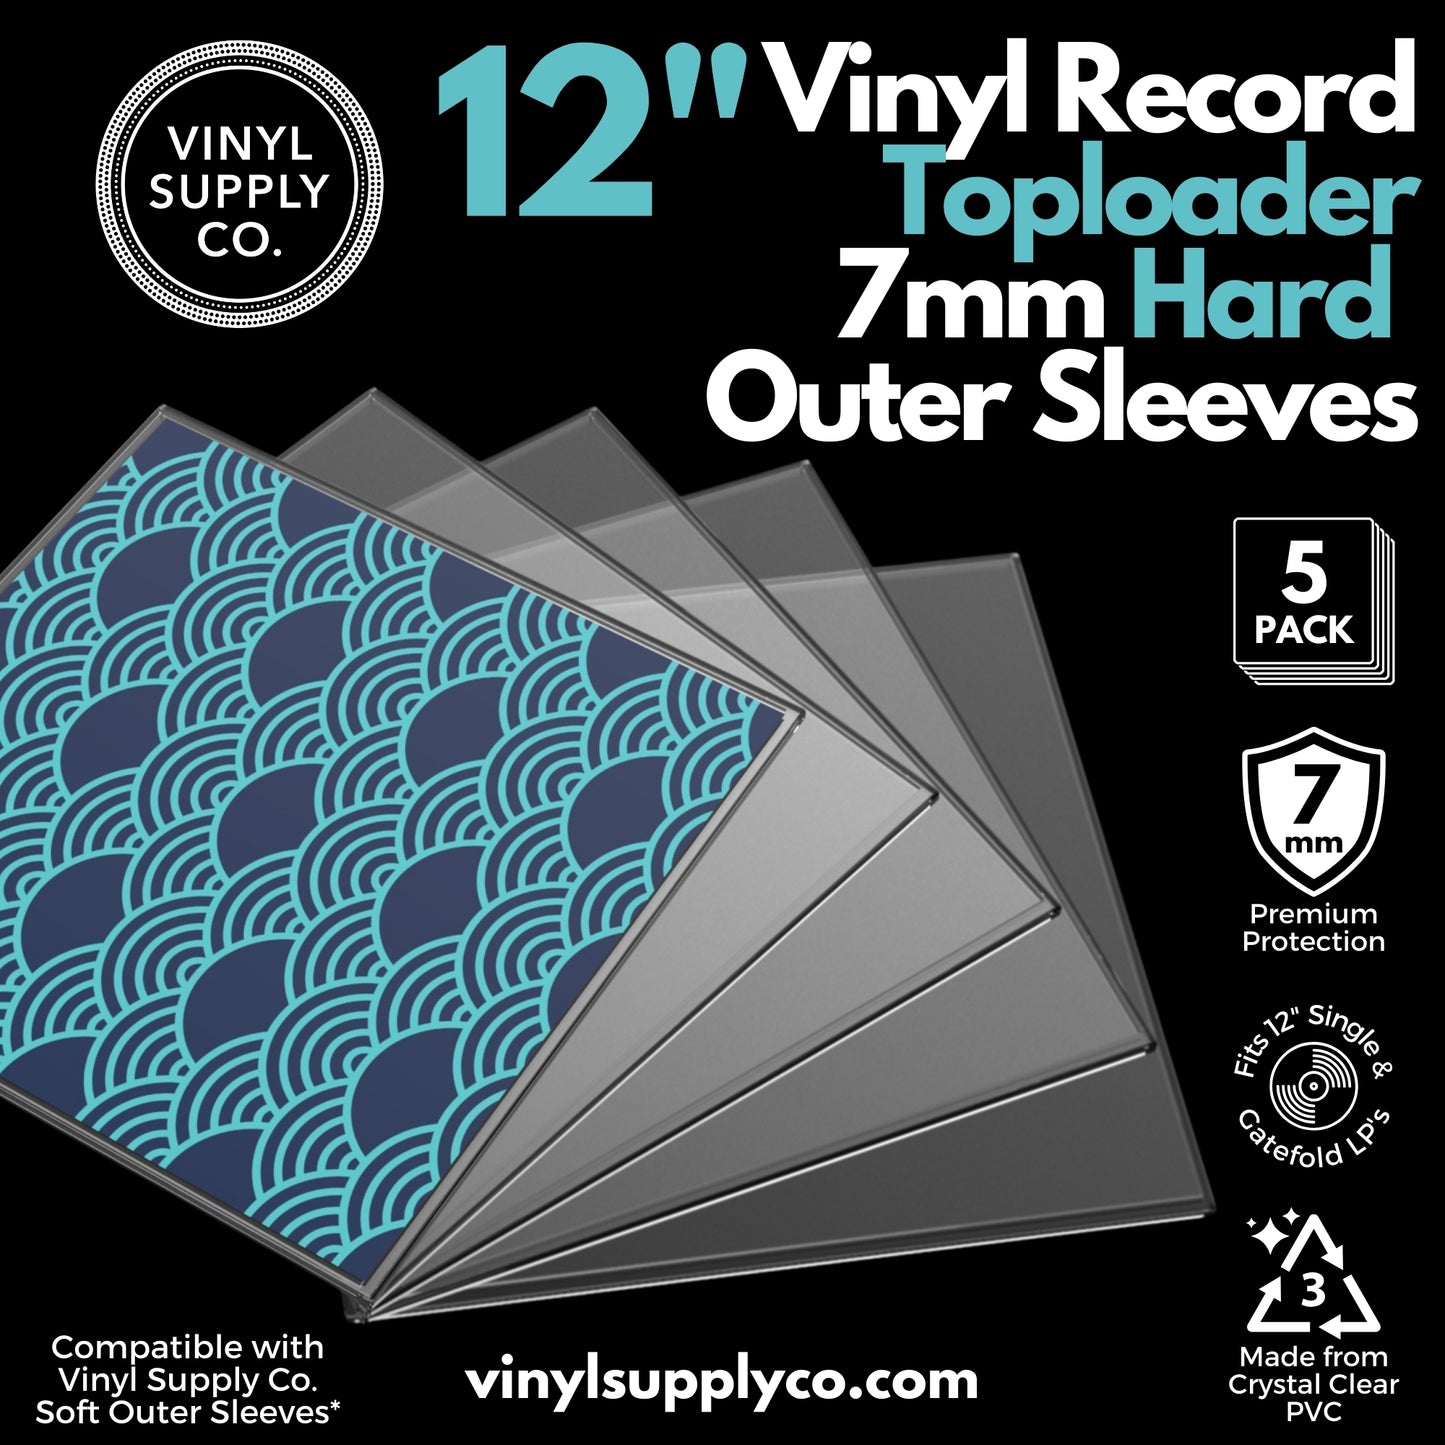 Vinyl Record Toploader 7mm Hard Outer Sleeves